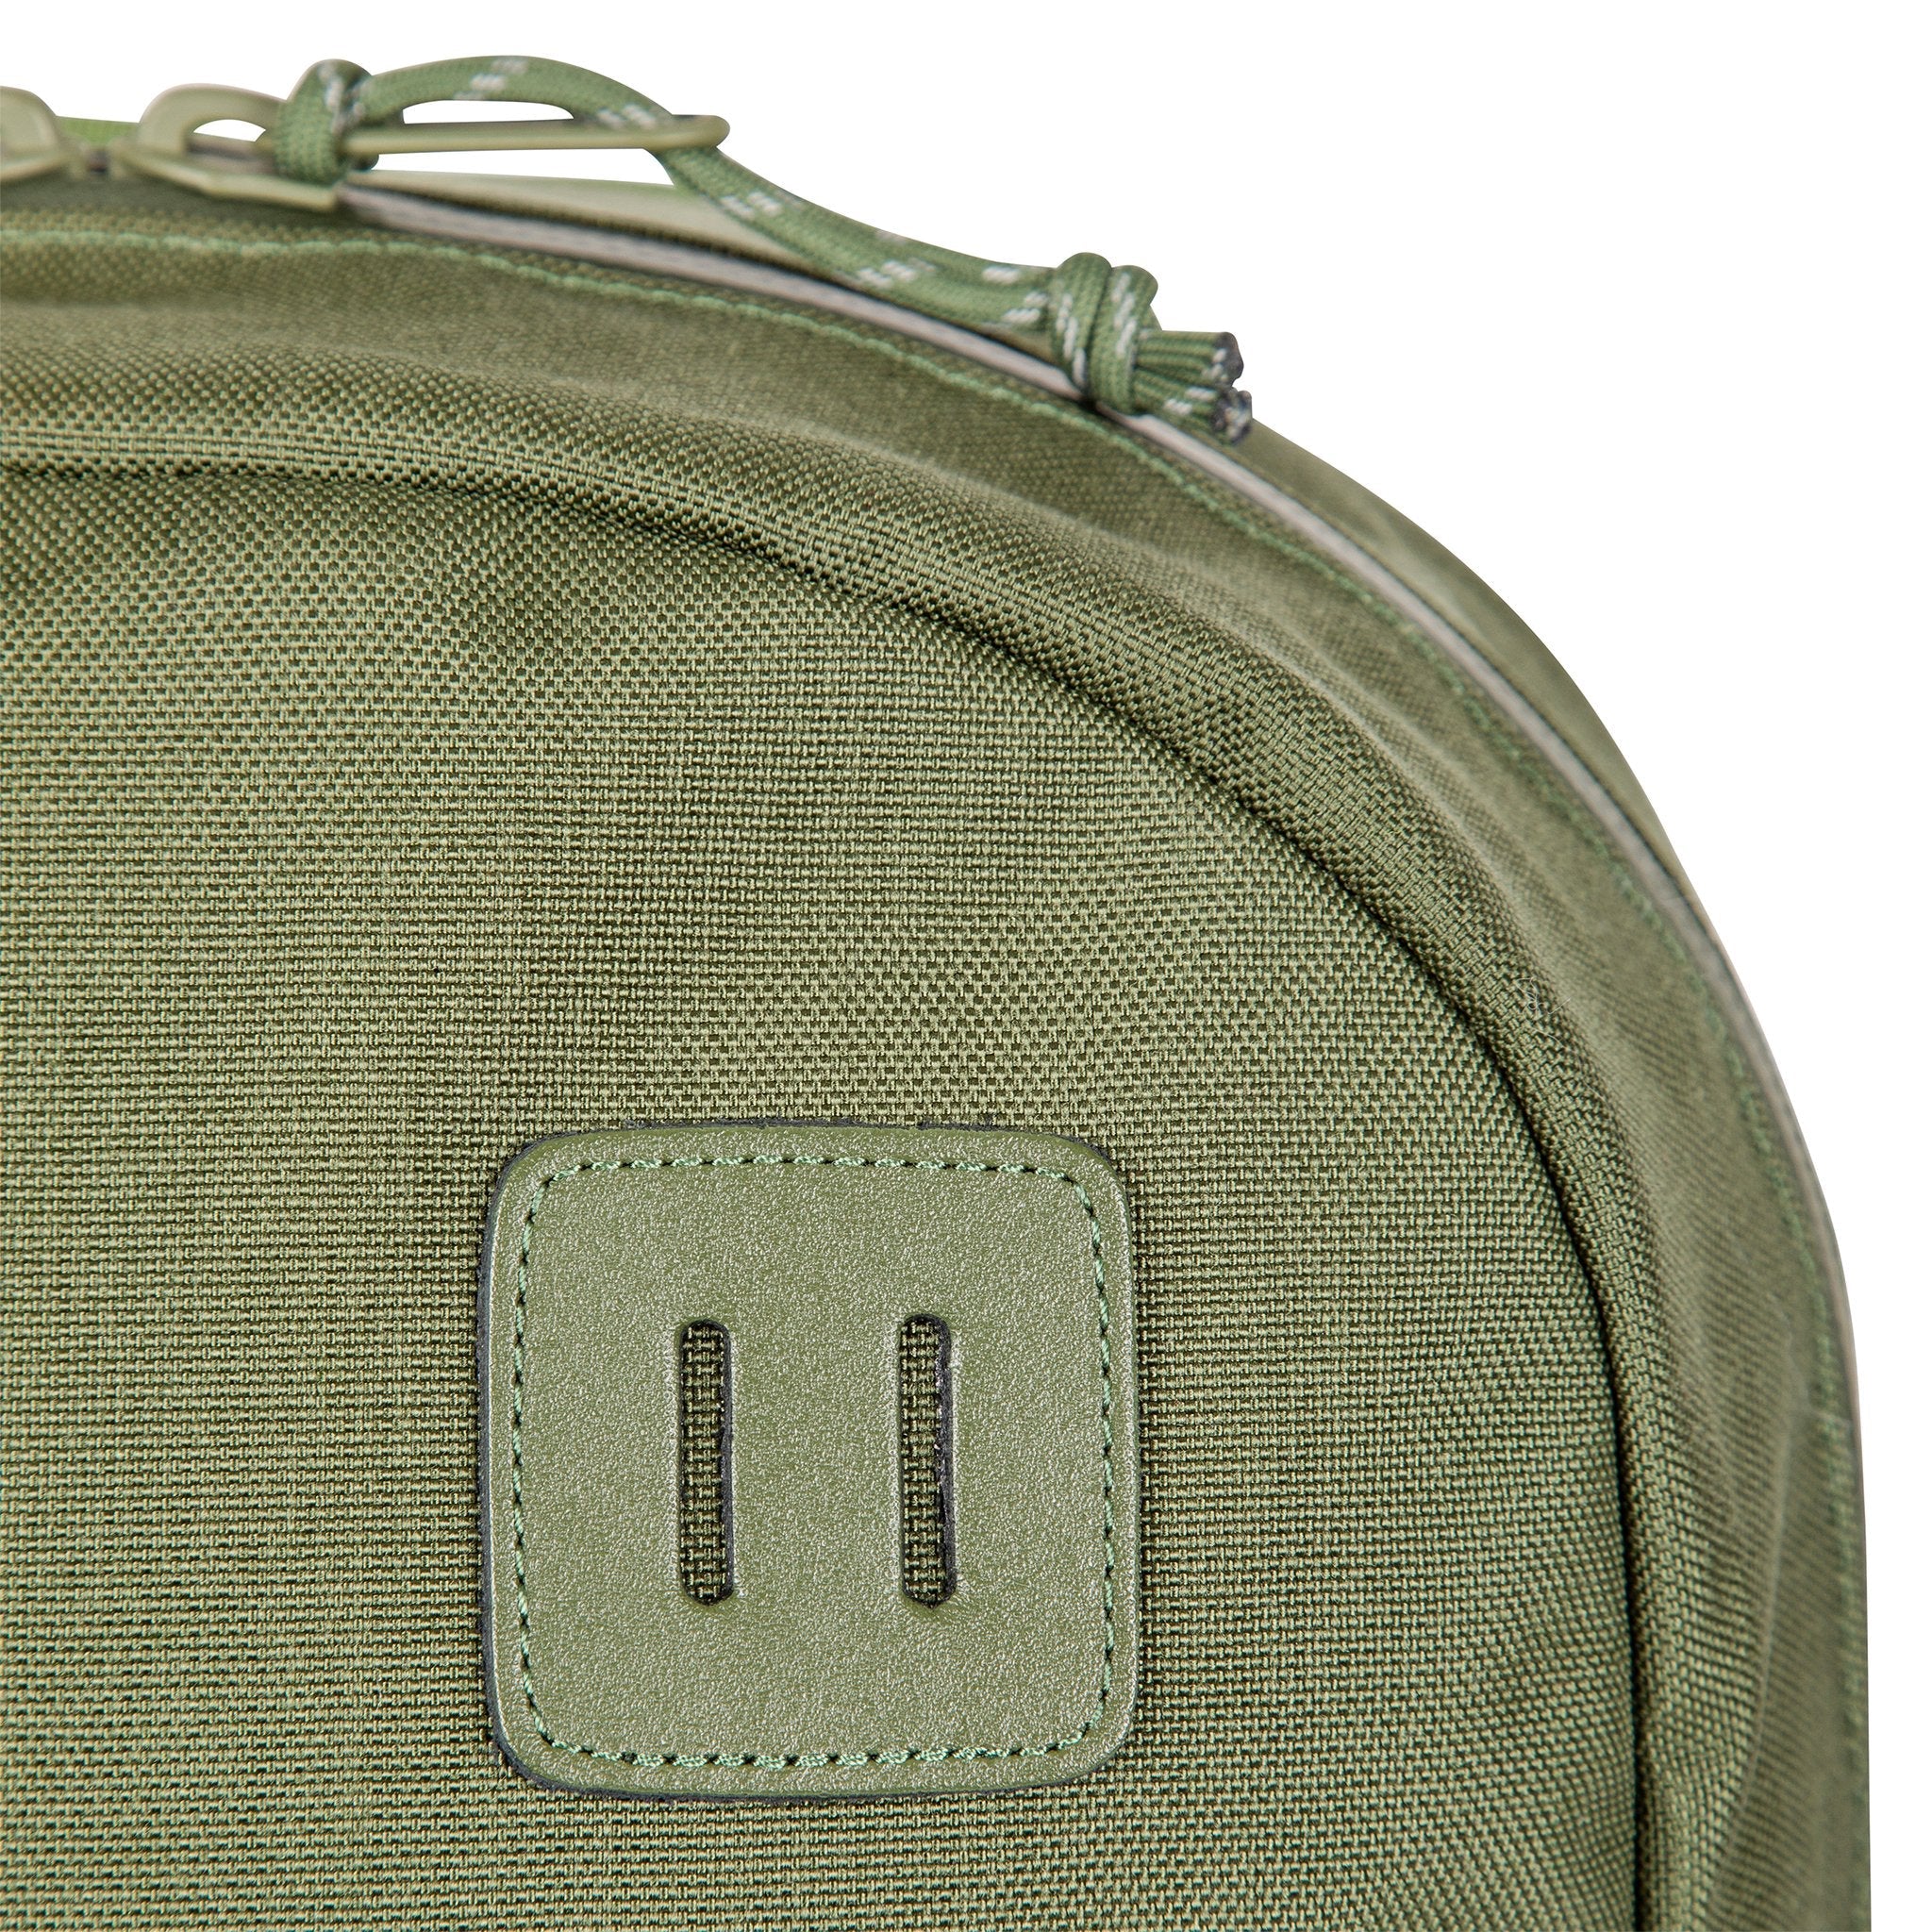 General shot of lash tab on Topo Designs Daypack Tech 100% recycled nylon backpack in "Olive" green.